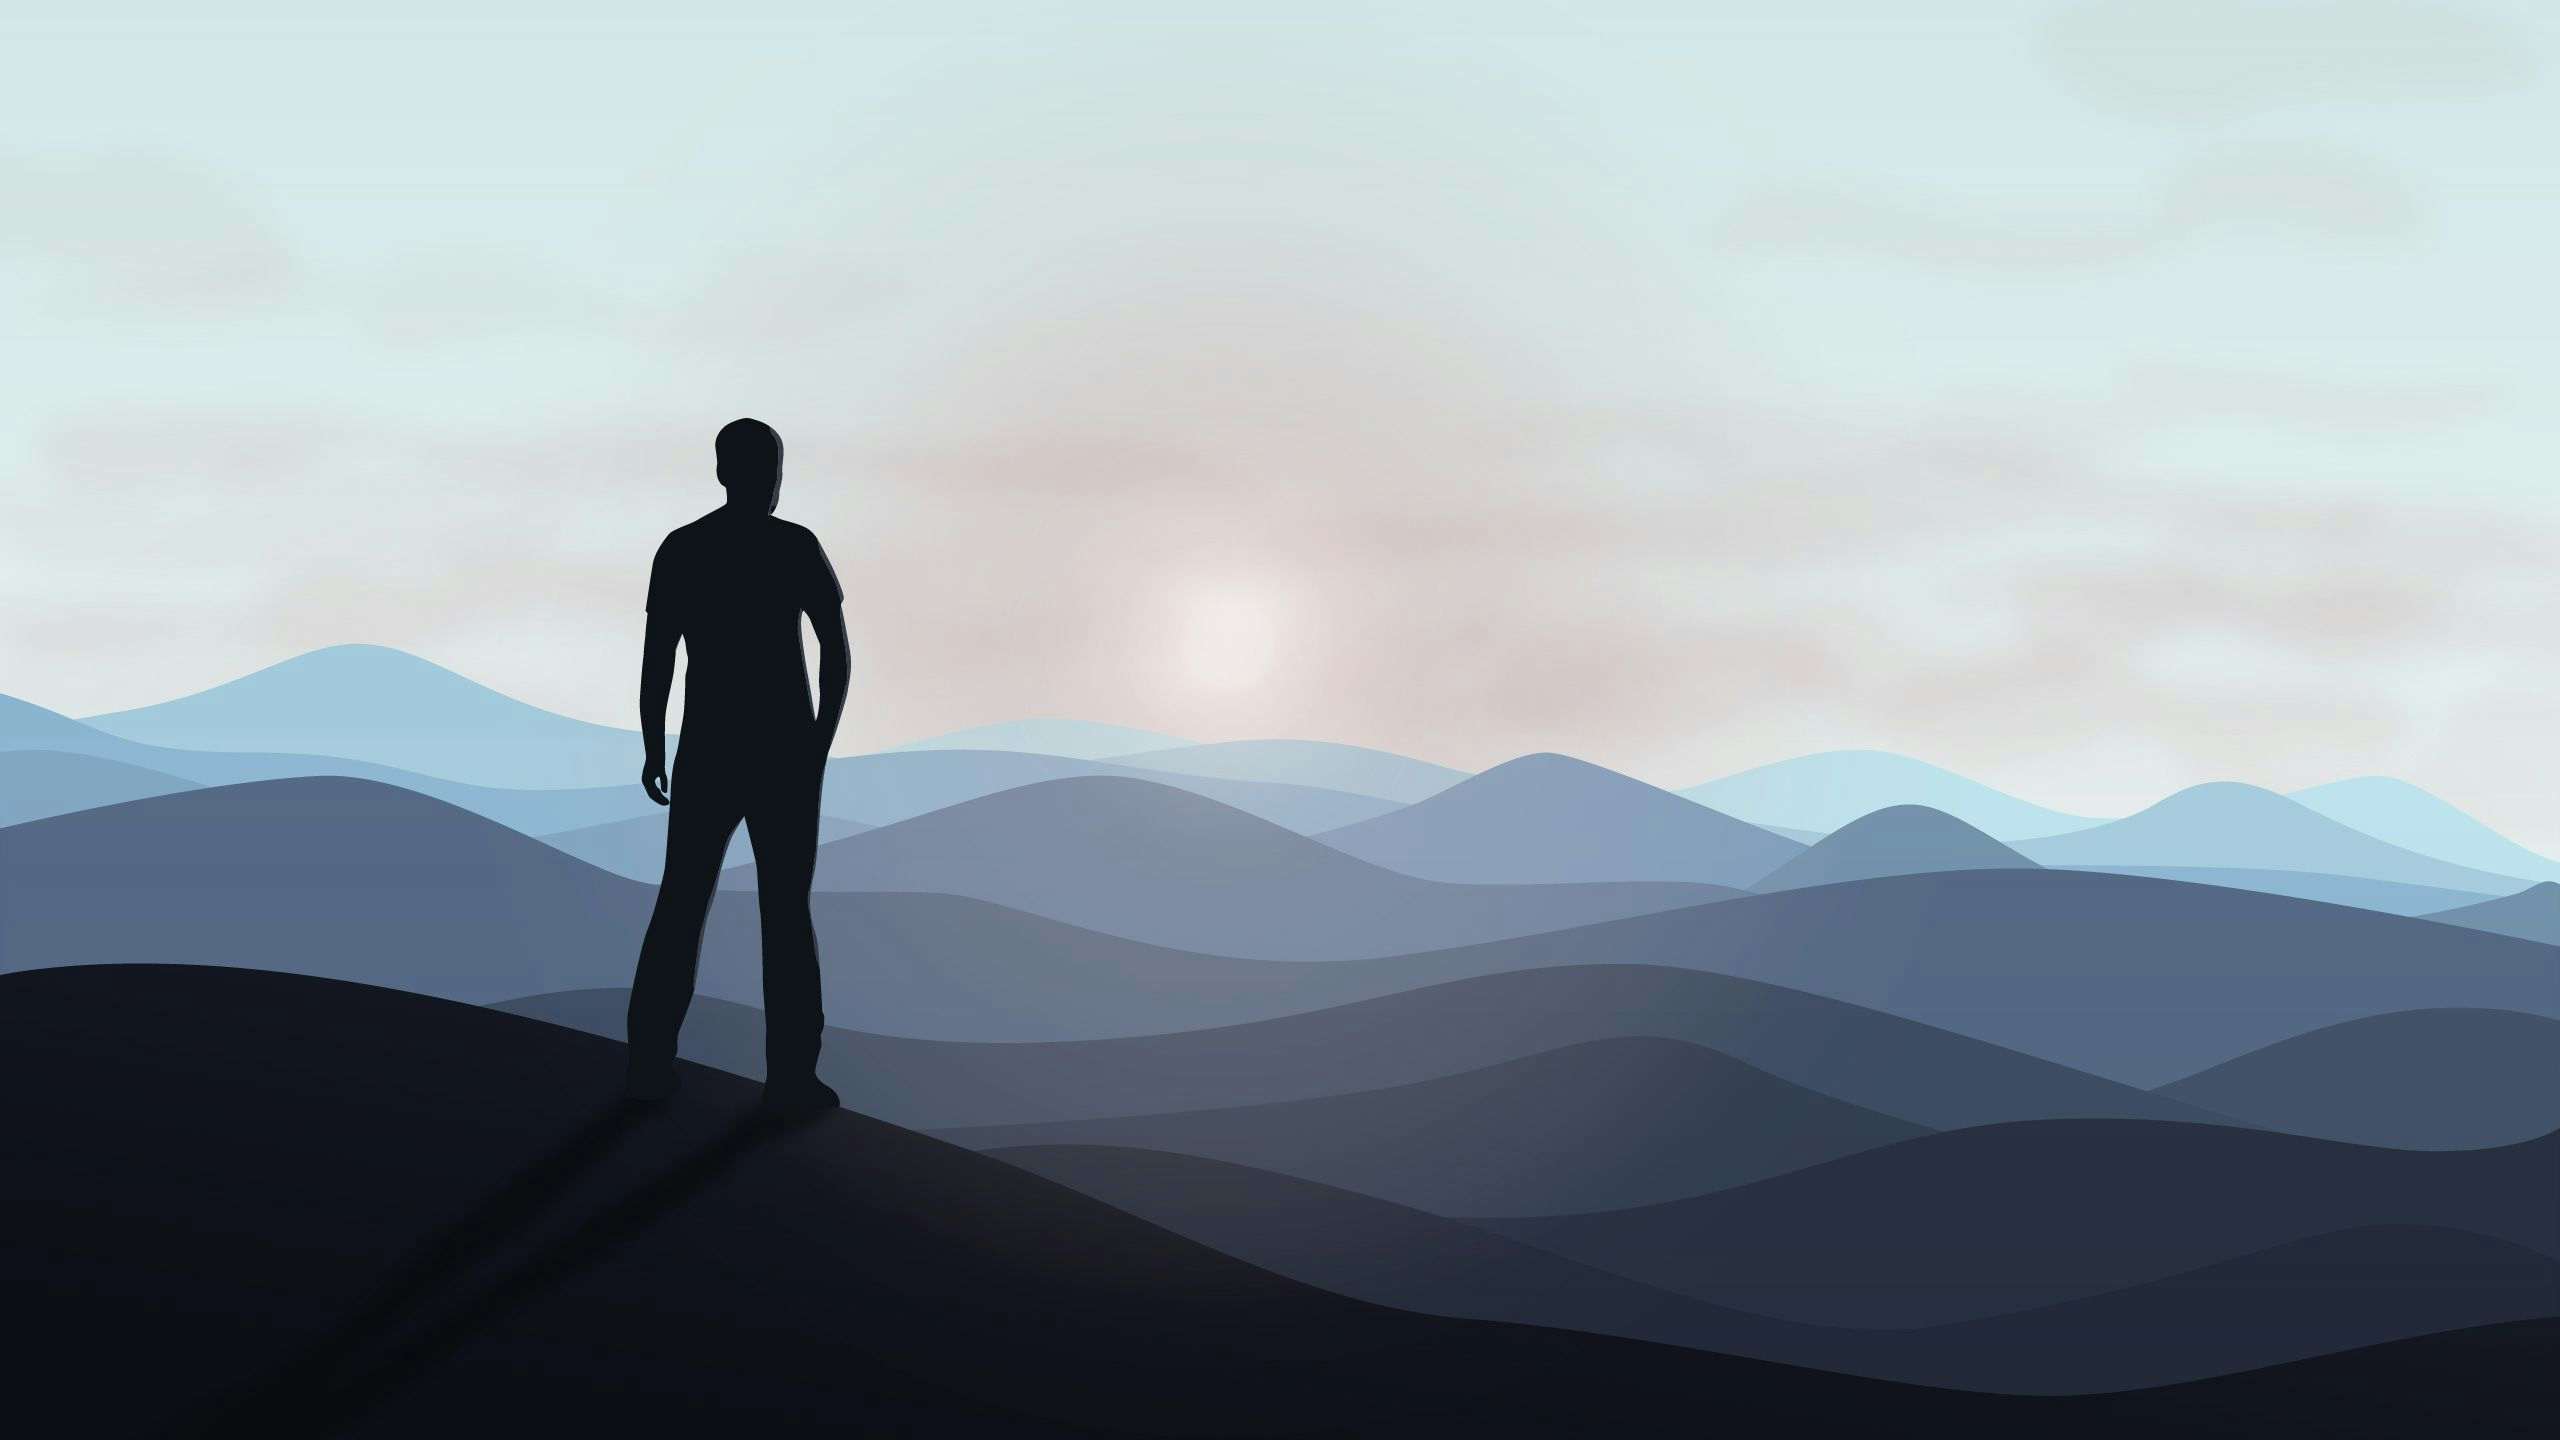 Over the mountains silhouette illustration by Xavier Wendling.